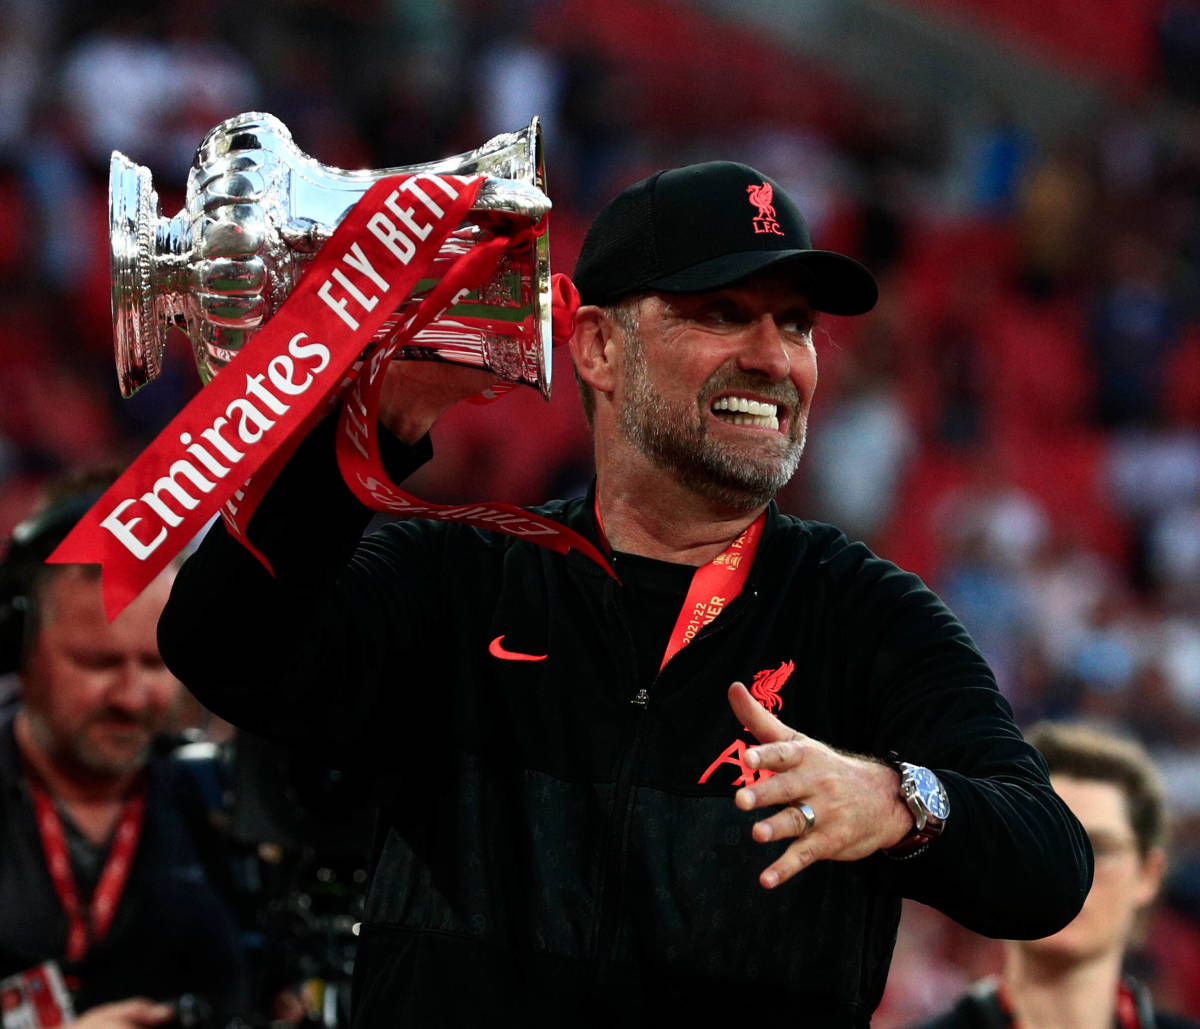 Jurgen Klopp pictured celebrating with the FA Cup trophy after his Liverpool side beat Chelsea in the 2022 final at Wembley